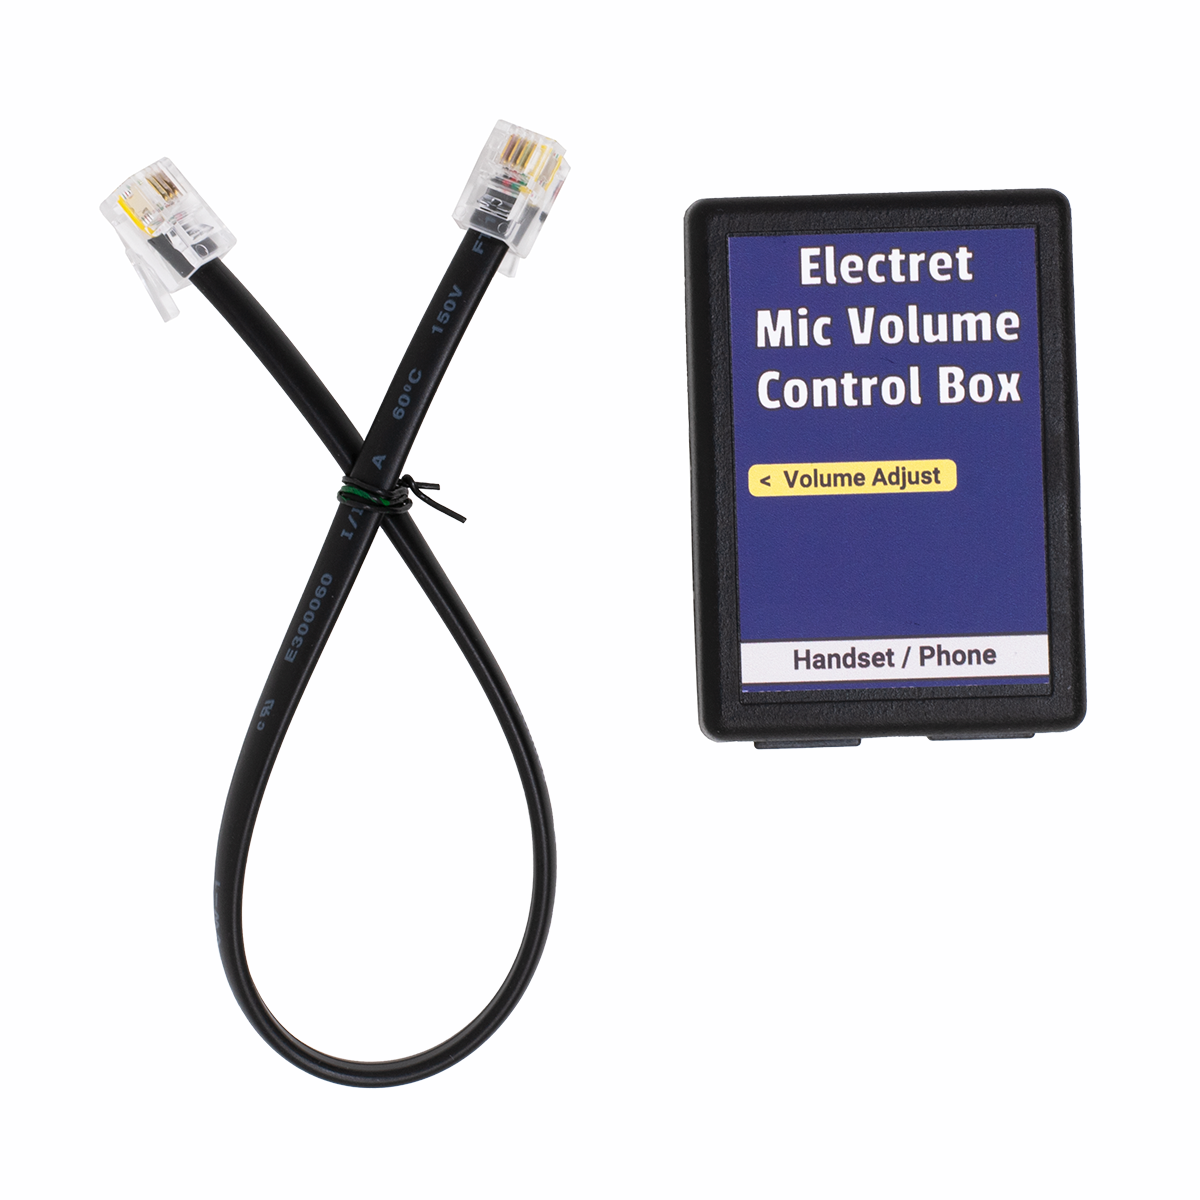 Electret Mic Volume Control Box with Cord (Top View)